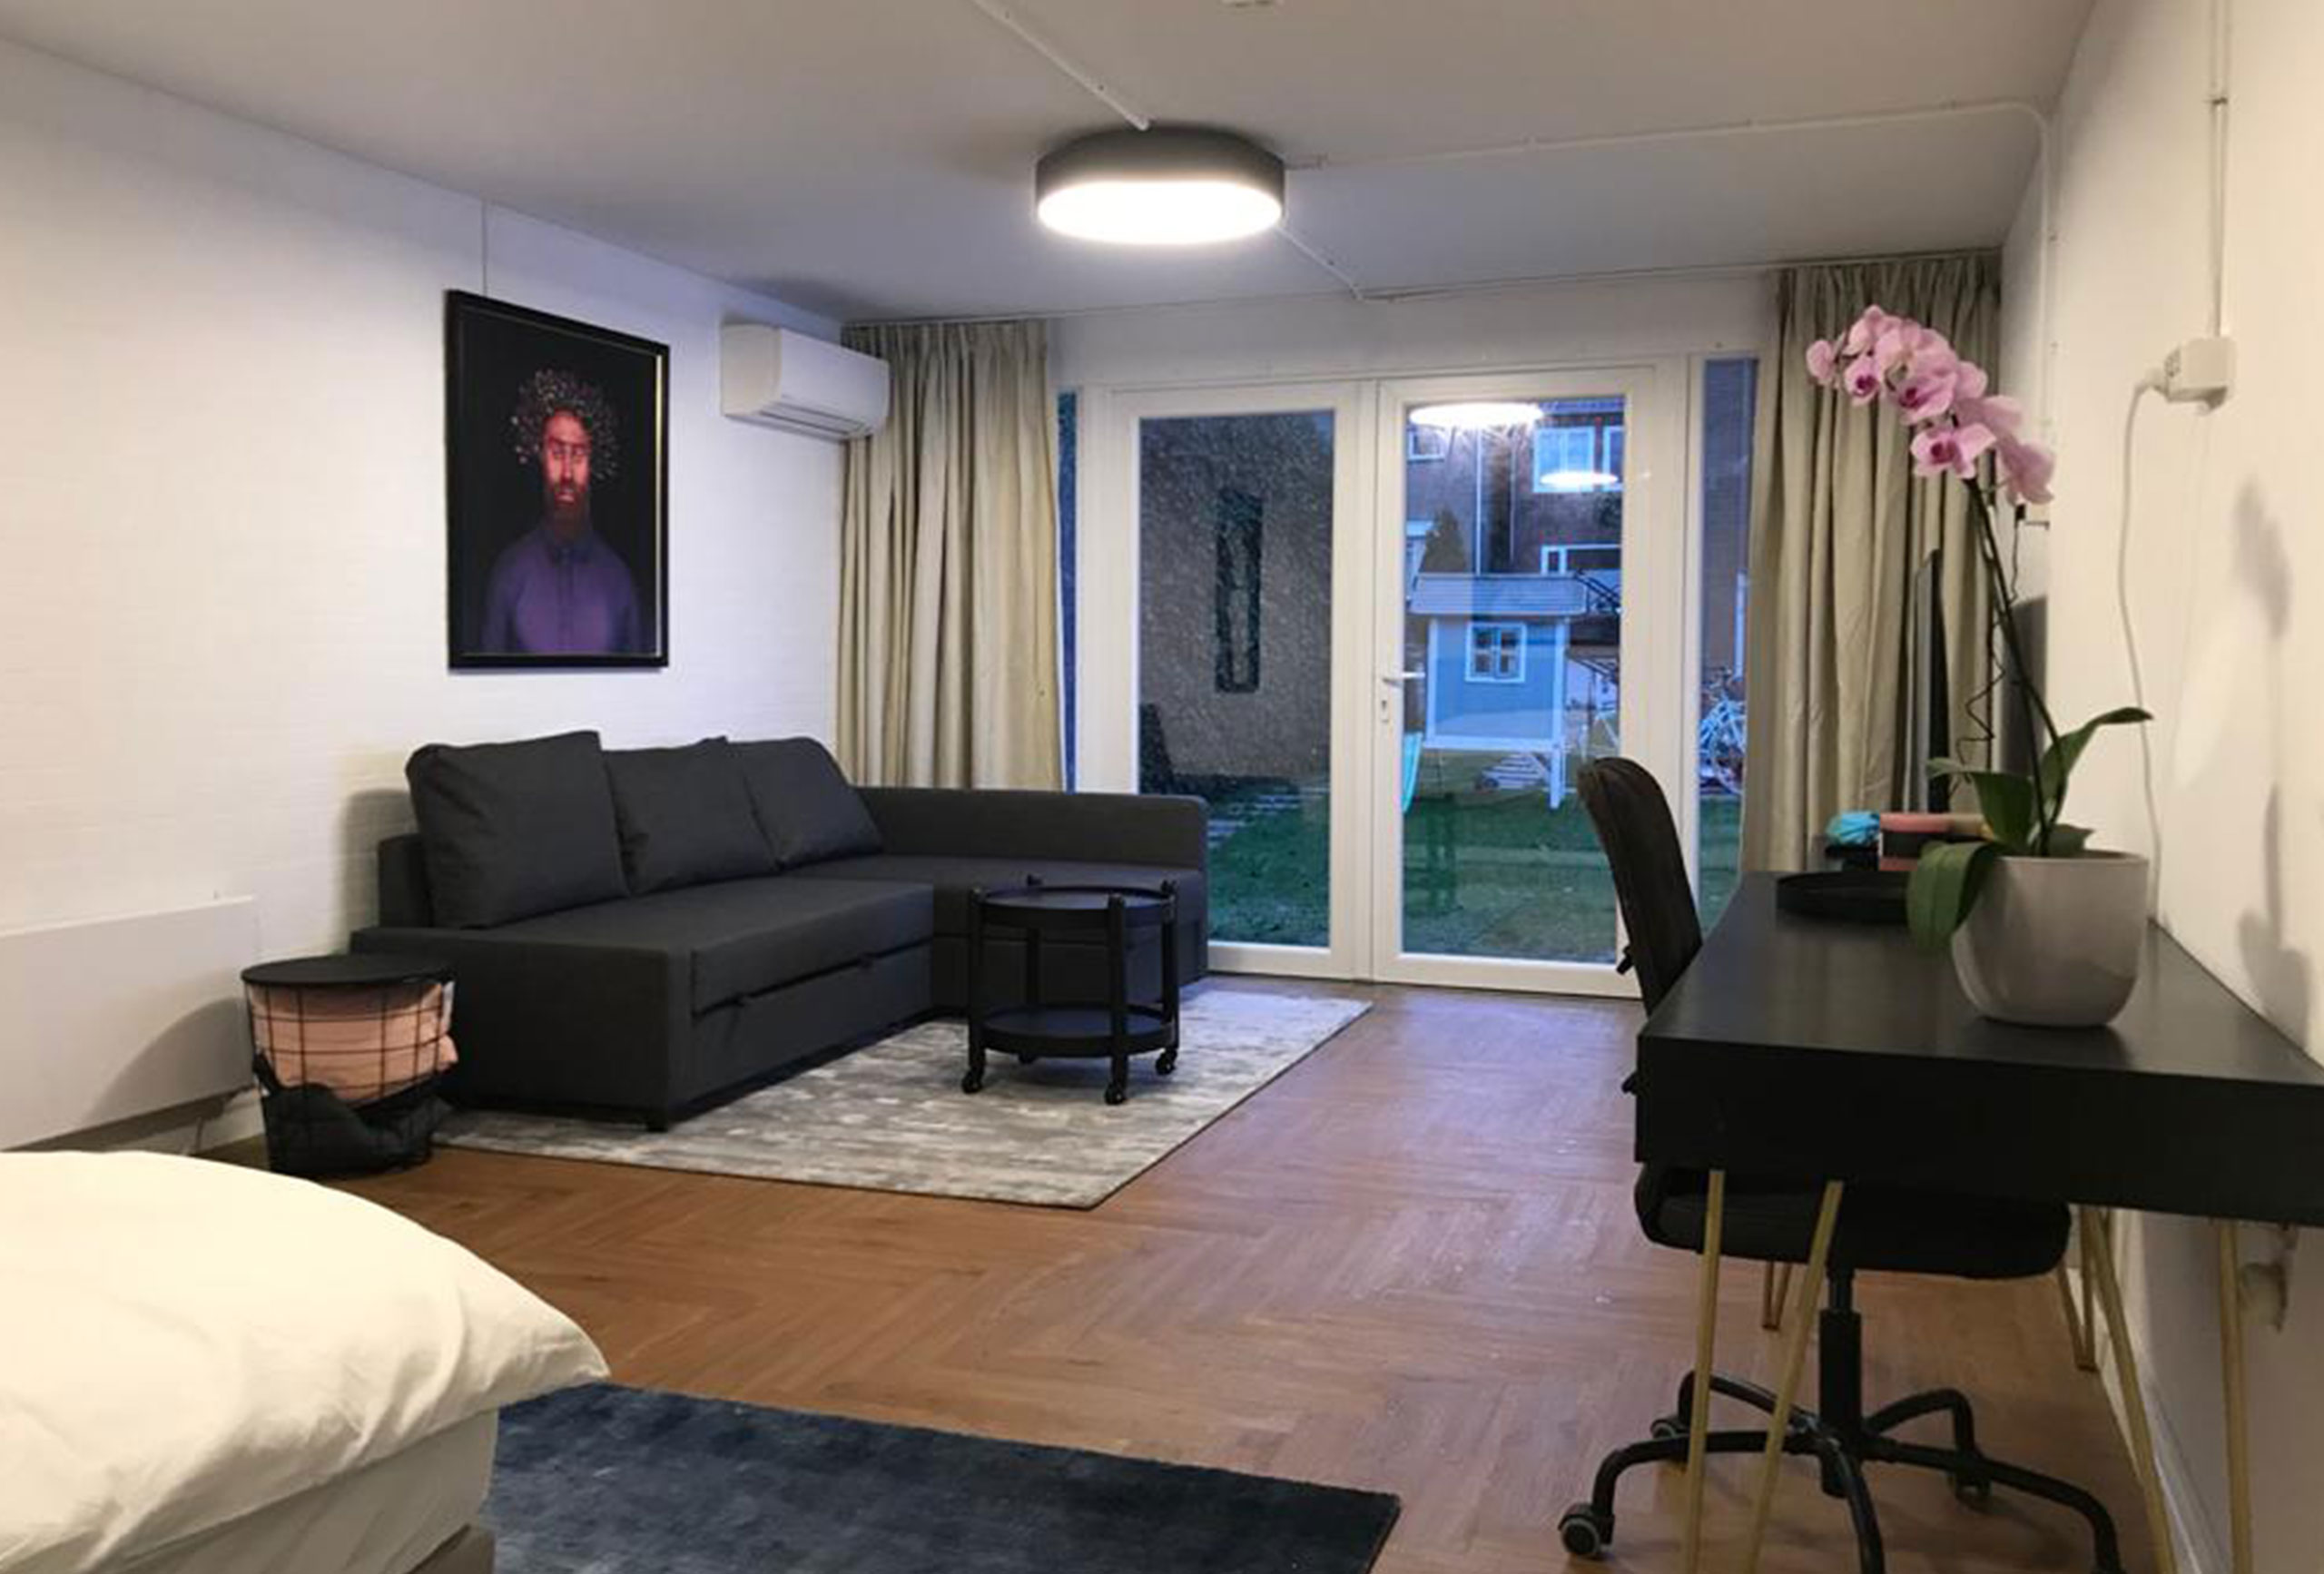 about rooms rental netherlands